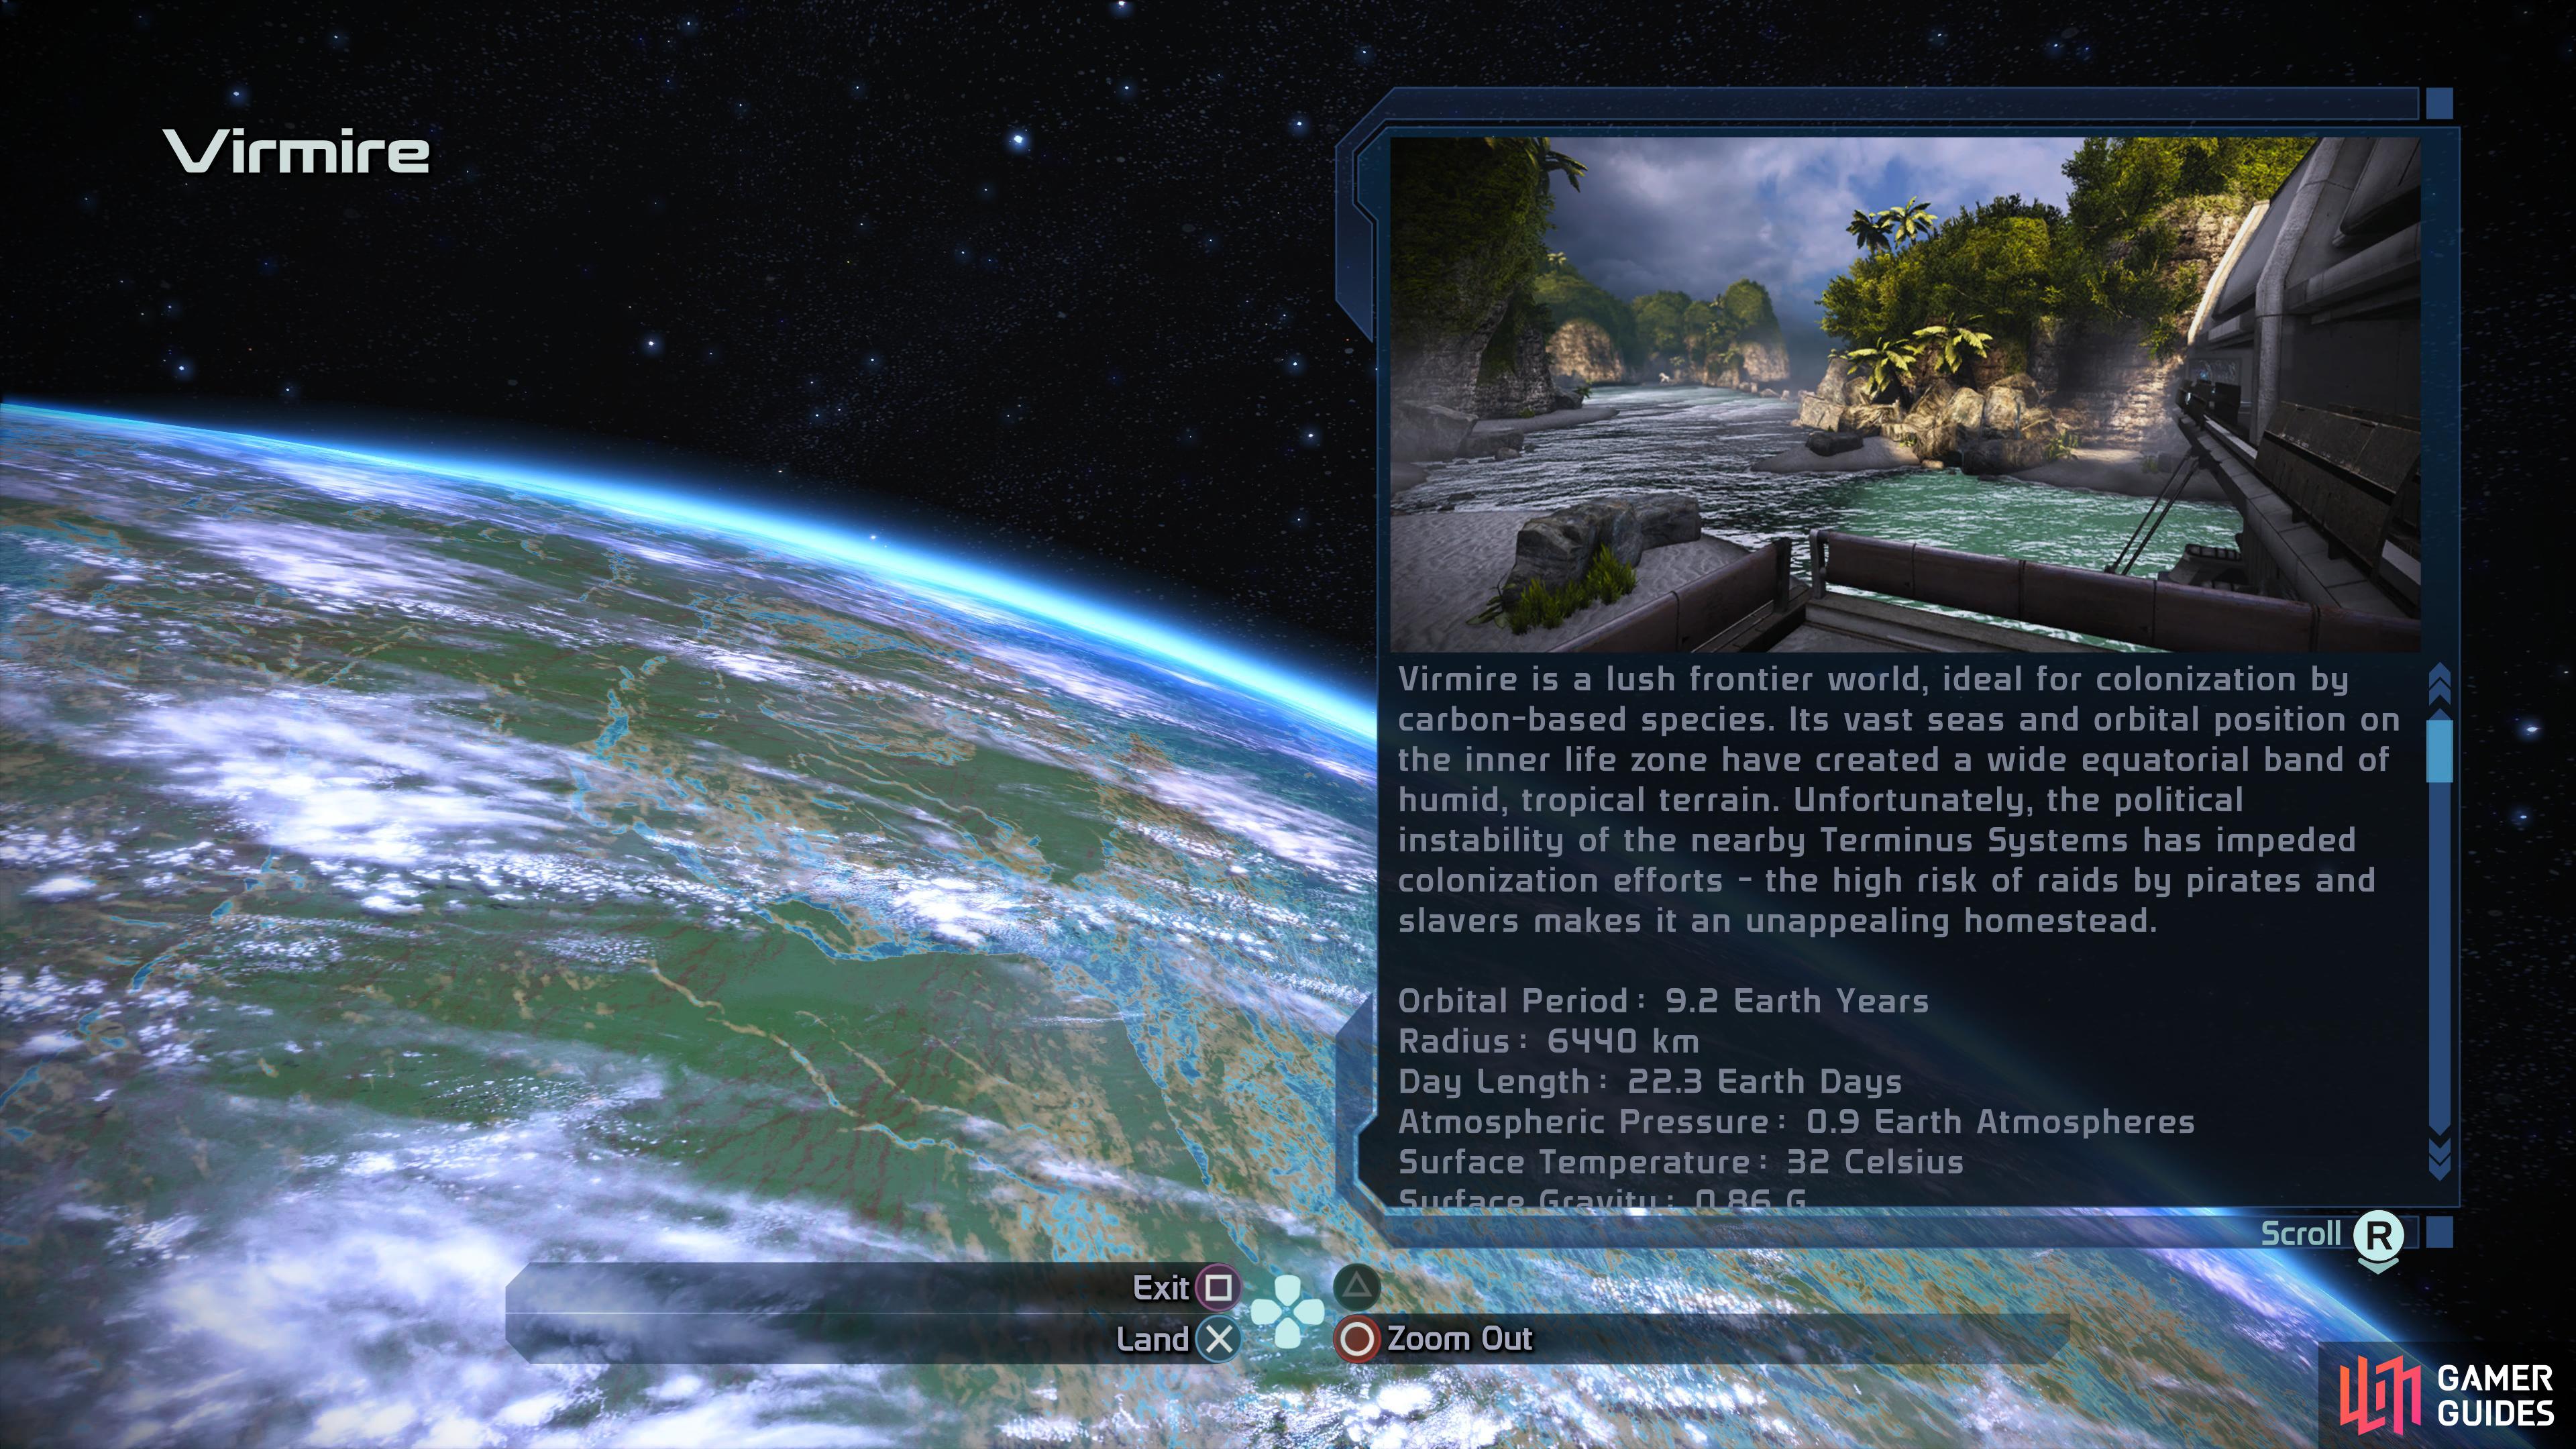 After completing two of the first three core missions, you’ll be given the mission on Virmire.